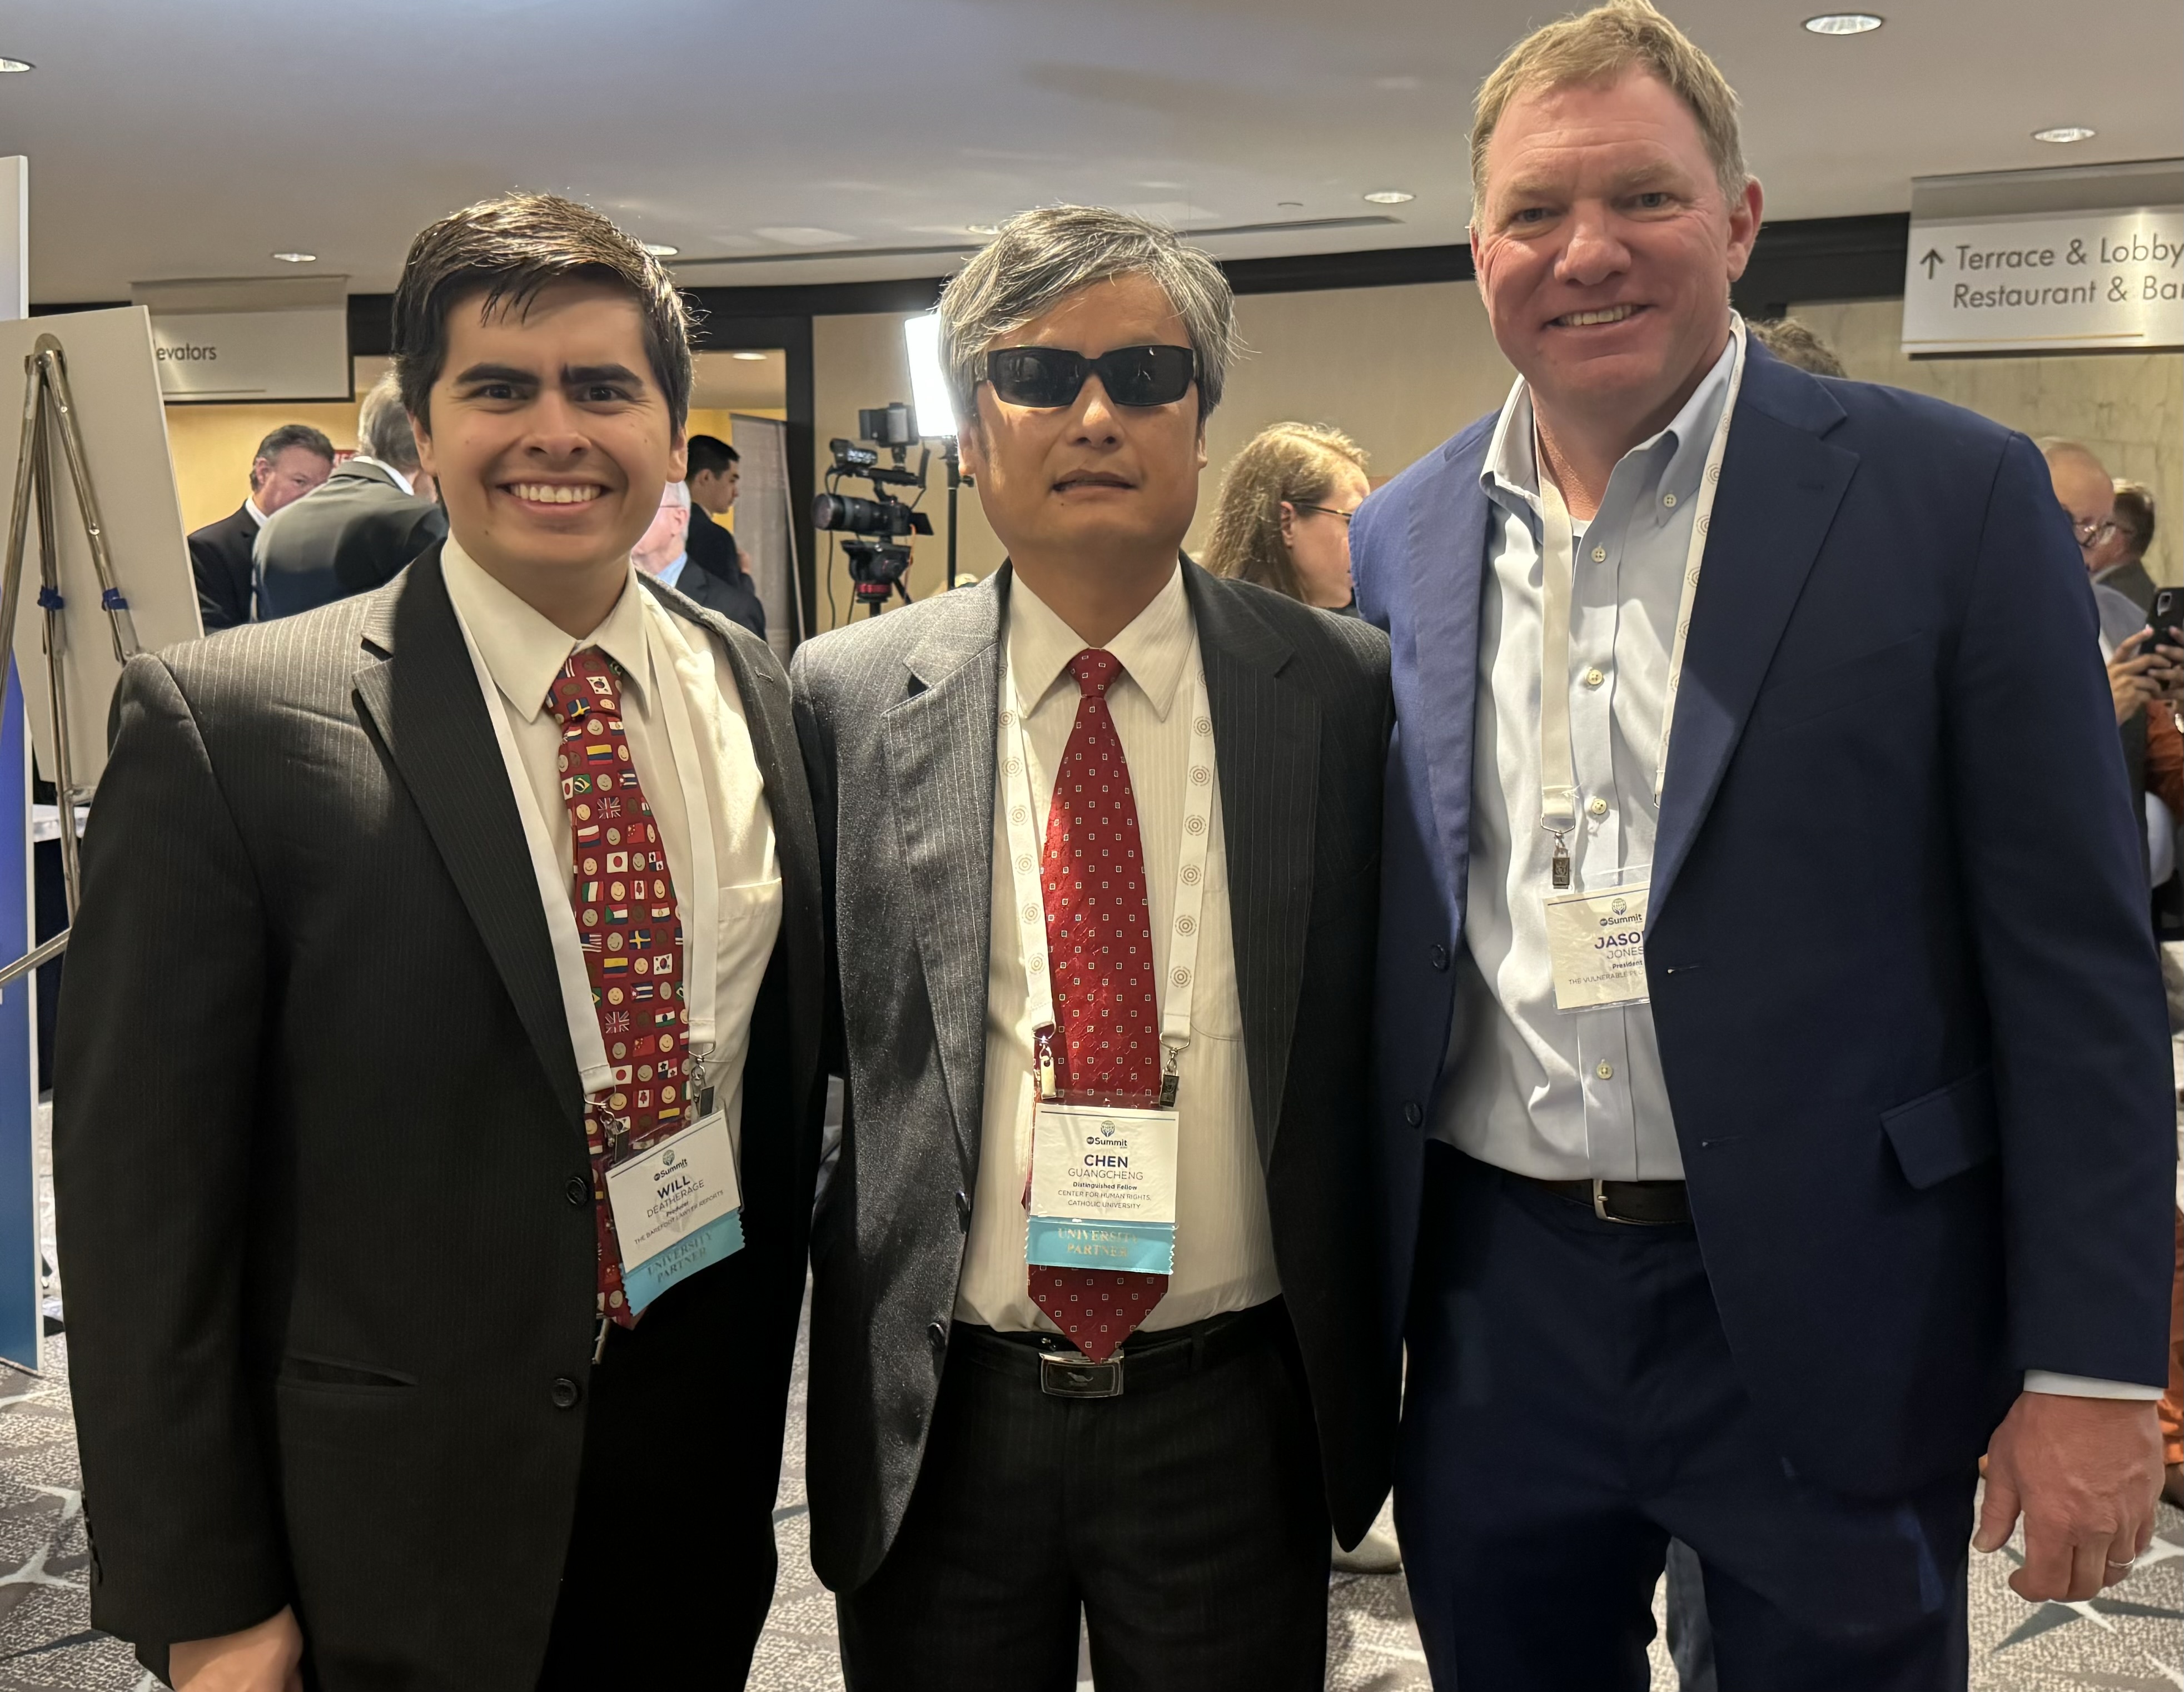 Will Deatherage, Producer of The Barefoot Lawyer Reports on China, Chen Guangcheng, and Jason Jones, President of the Vulnerable People Project who appeared on the Barefoot Lawyer Reports on China podcast in 2023.